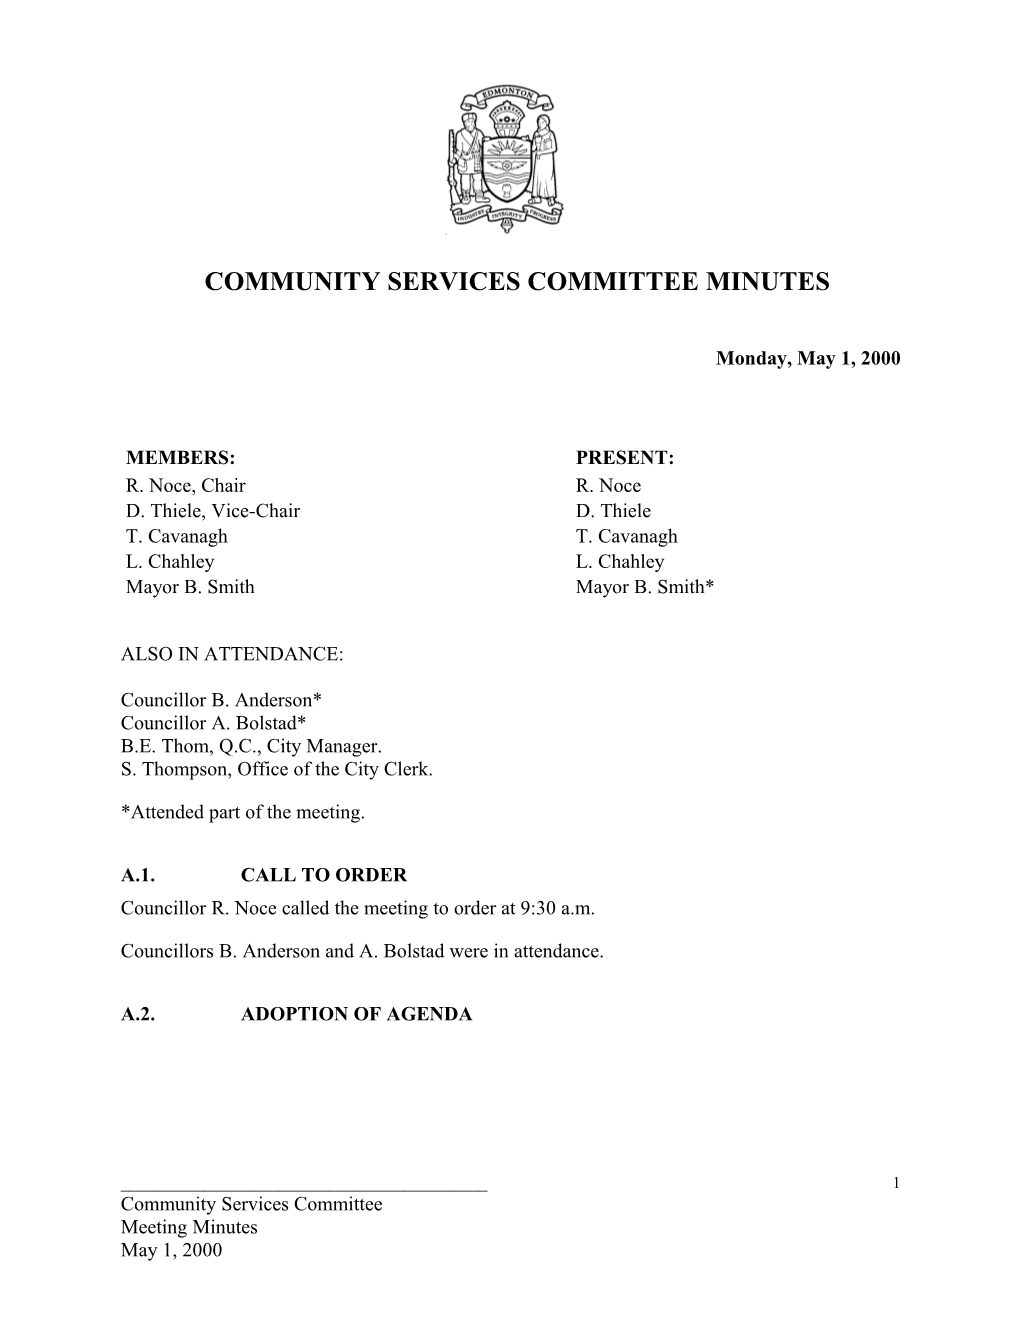 Minutes for Community Services Committee May 1, 2000 Meeting